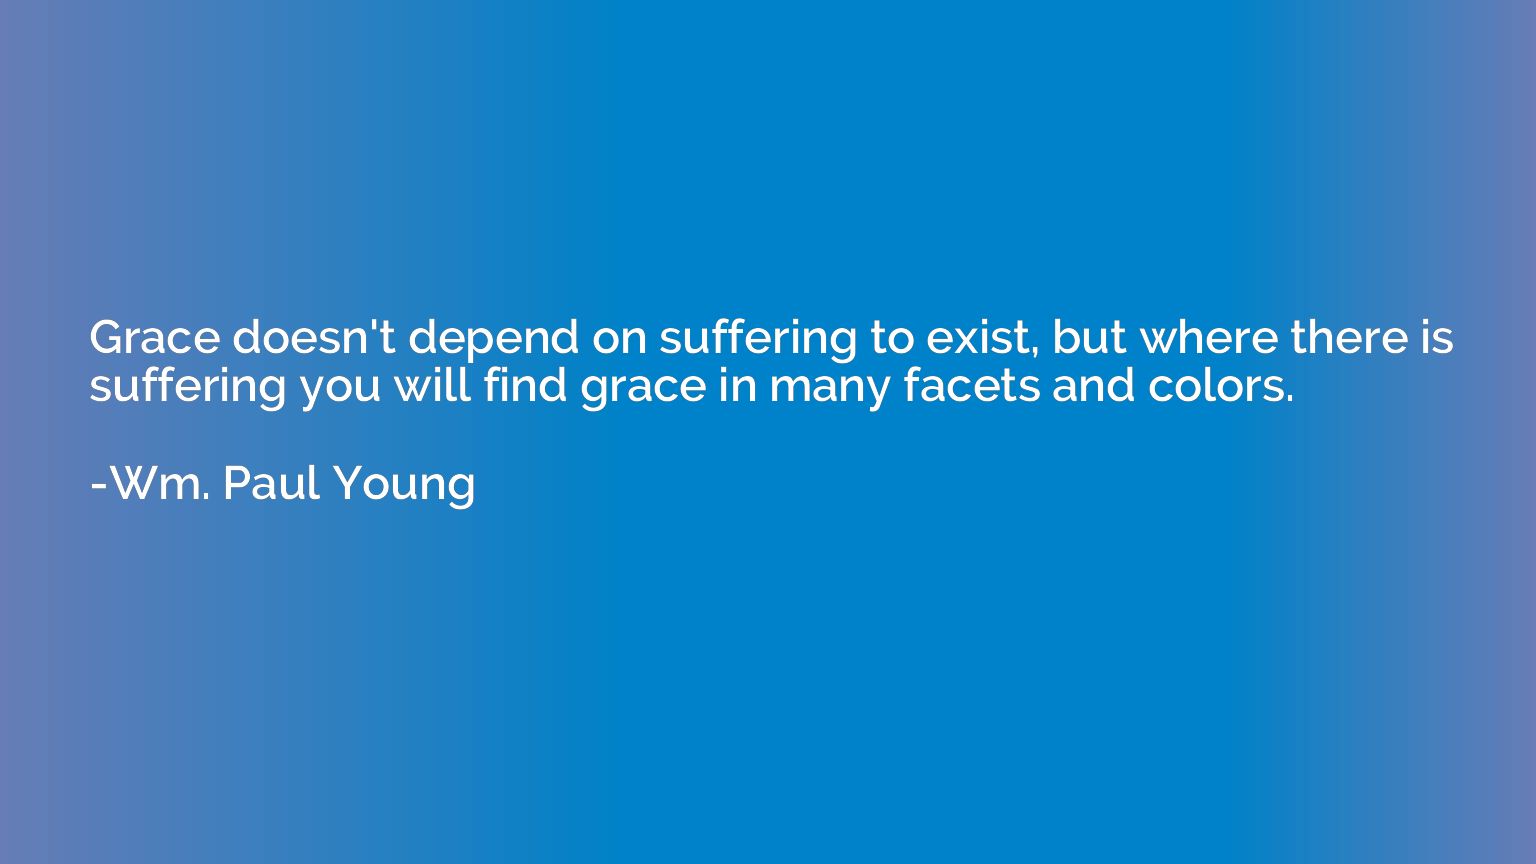 Grace doesn't depend on suffering to exist, but where there 